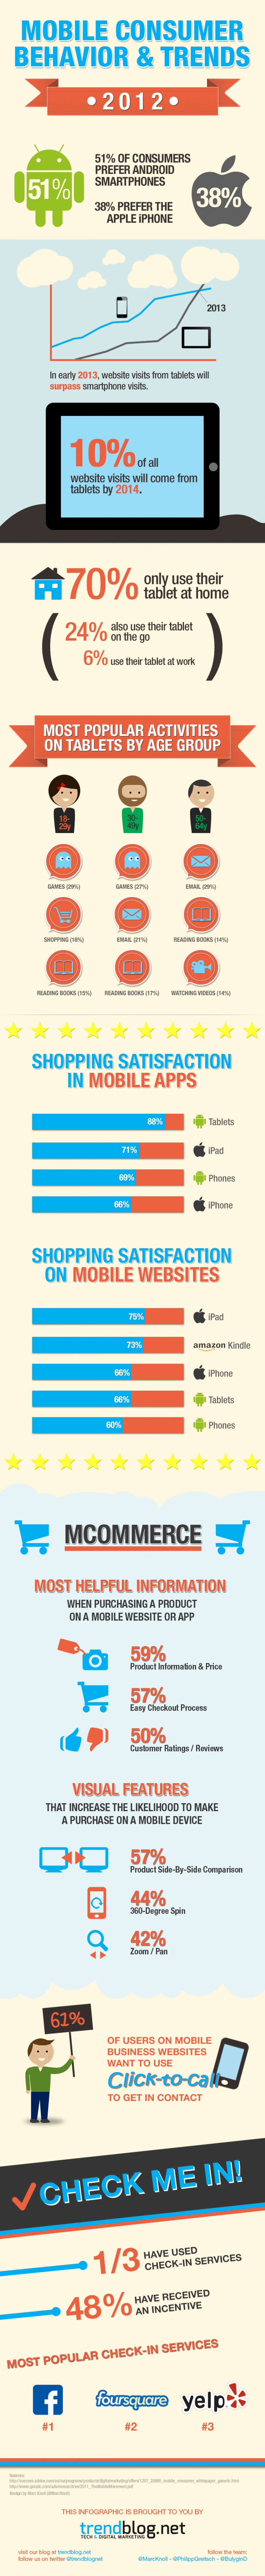  Mobile consumer behavior and trends